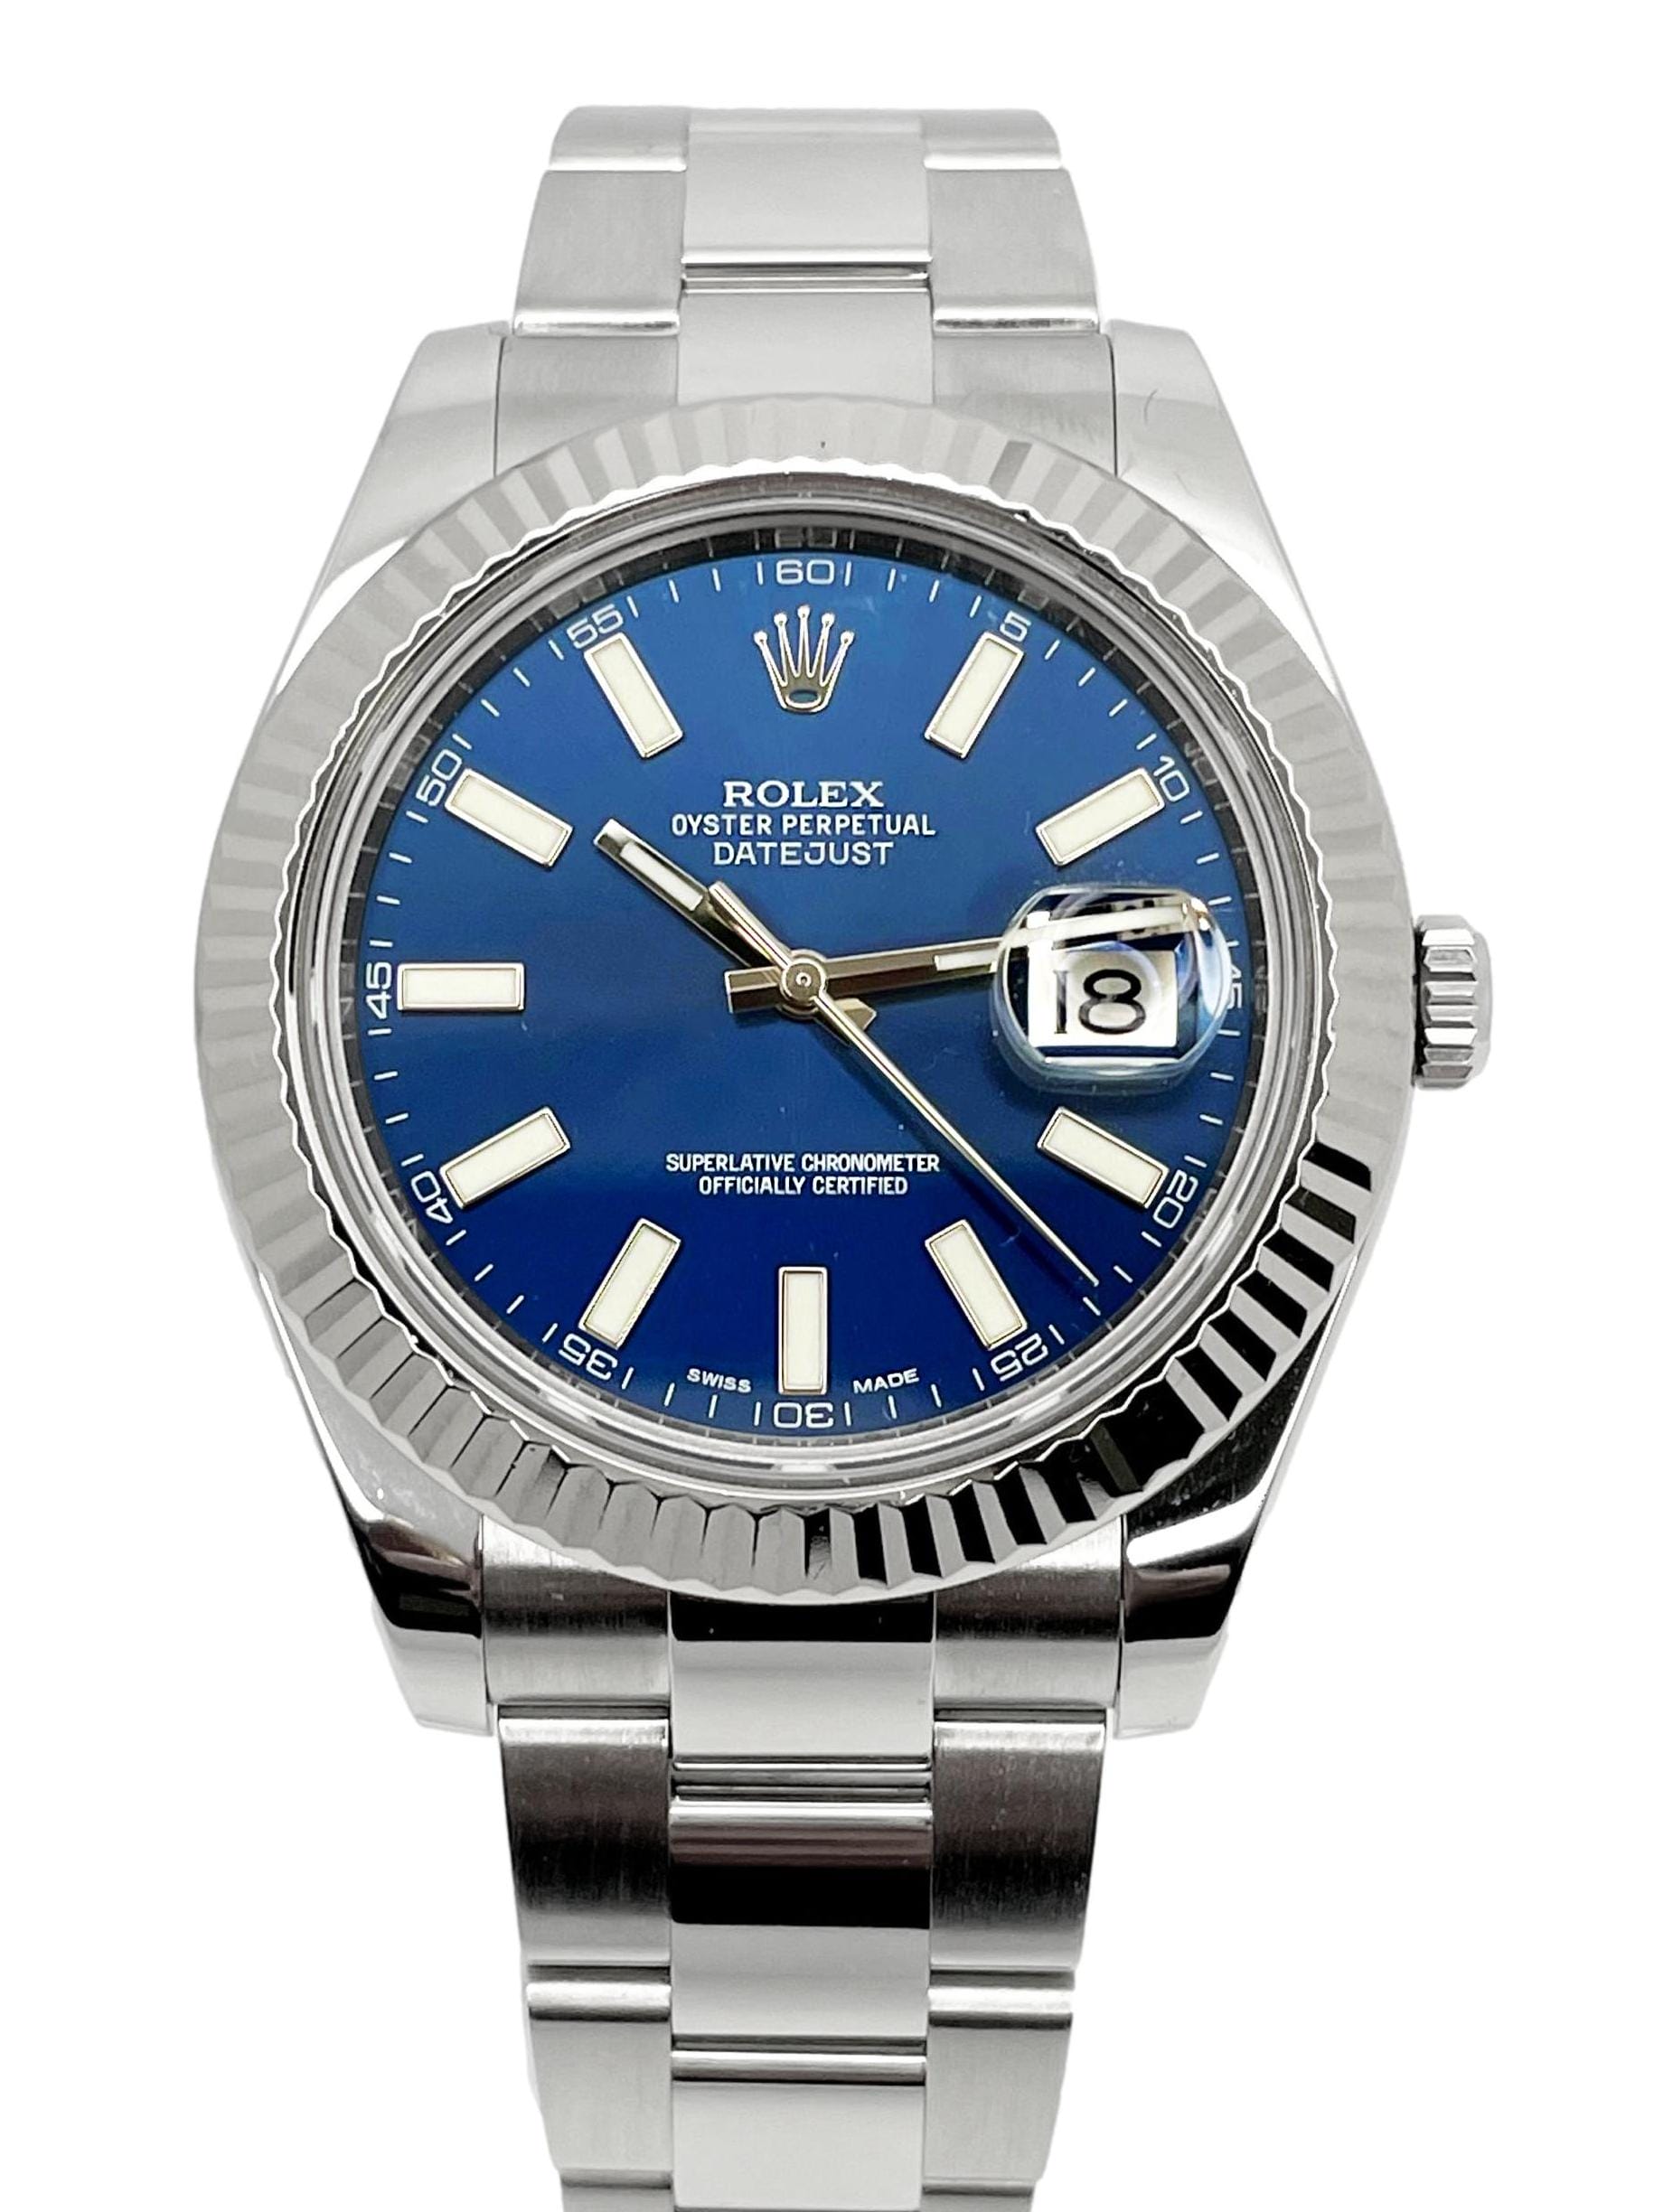 Rolex - 116334 - Datejust 2 - Stainless Steel - Blue Dial / Fluted ...